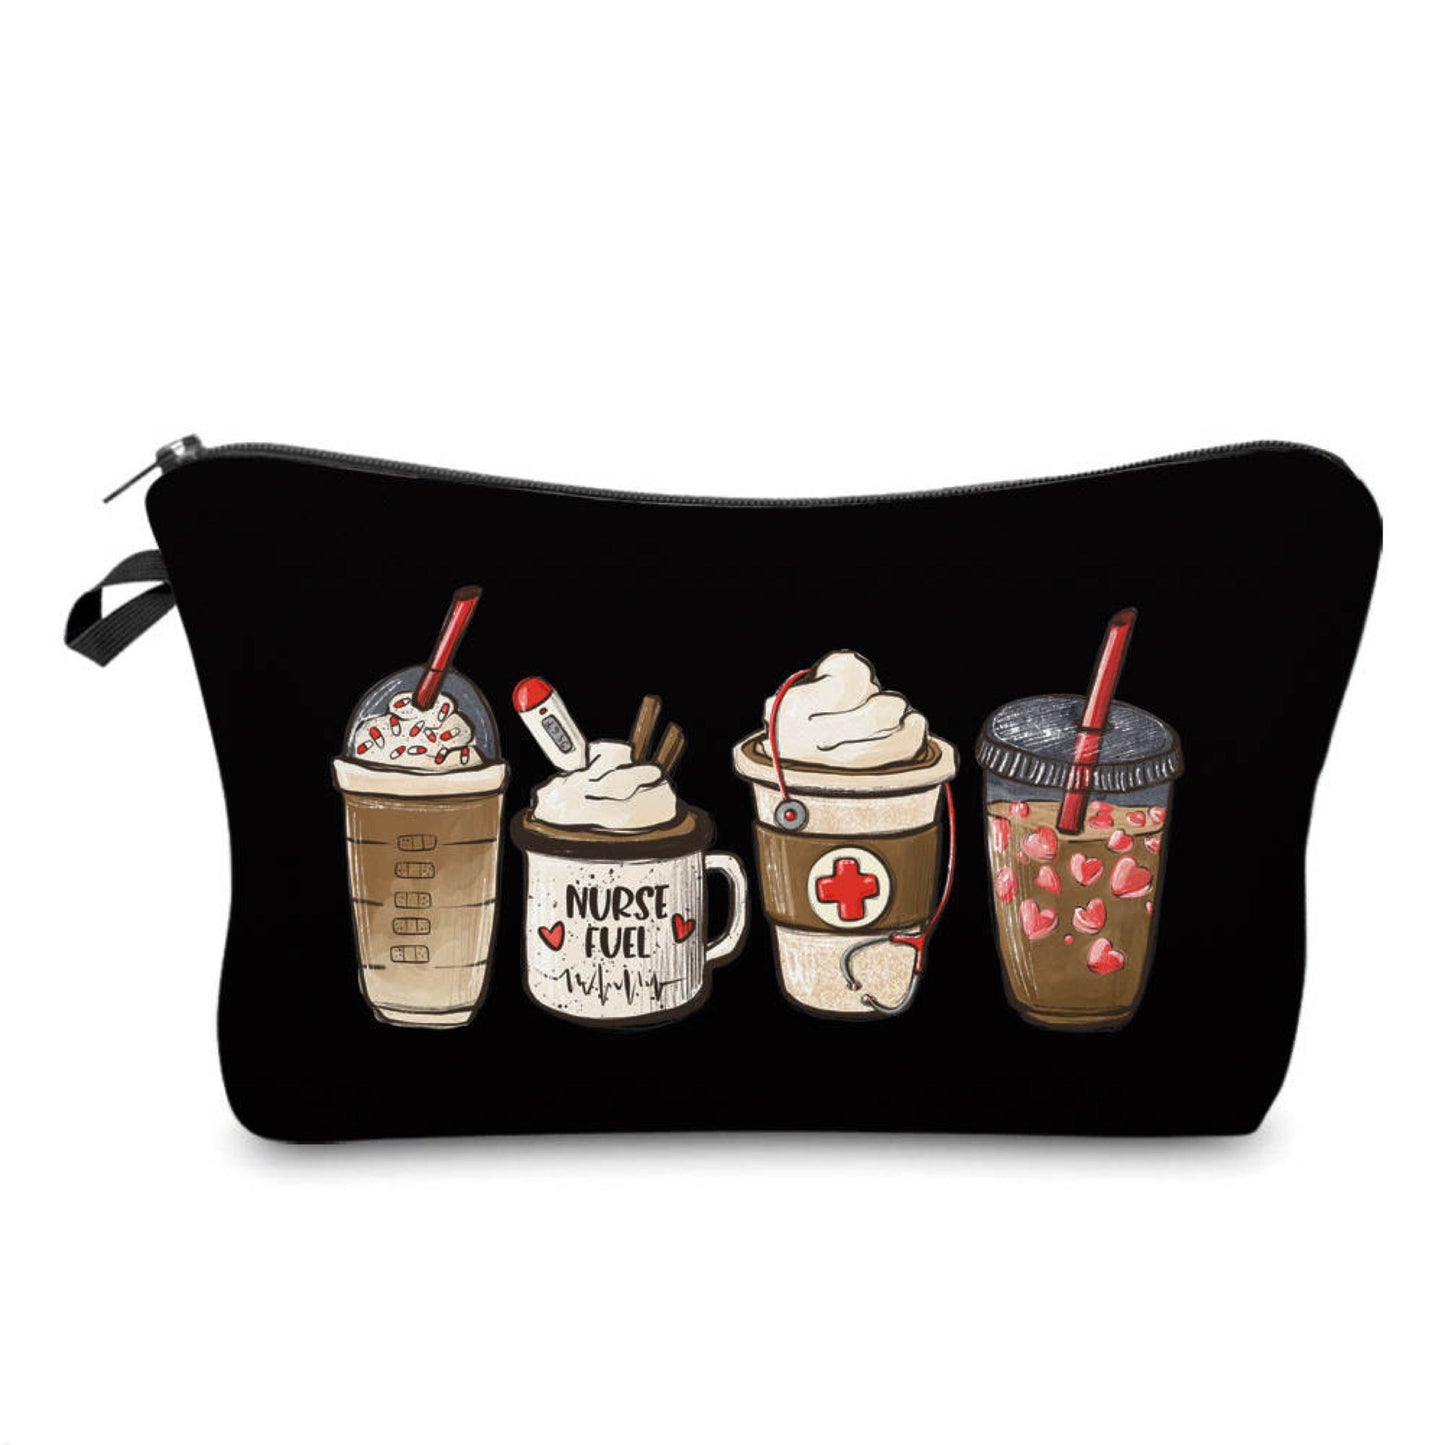 Nurse Fuel Coffee - Water-Resistant Multi-Use Pouch